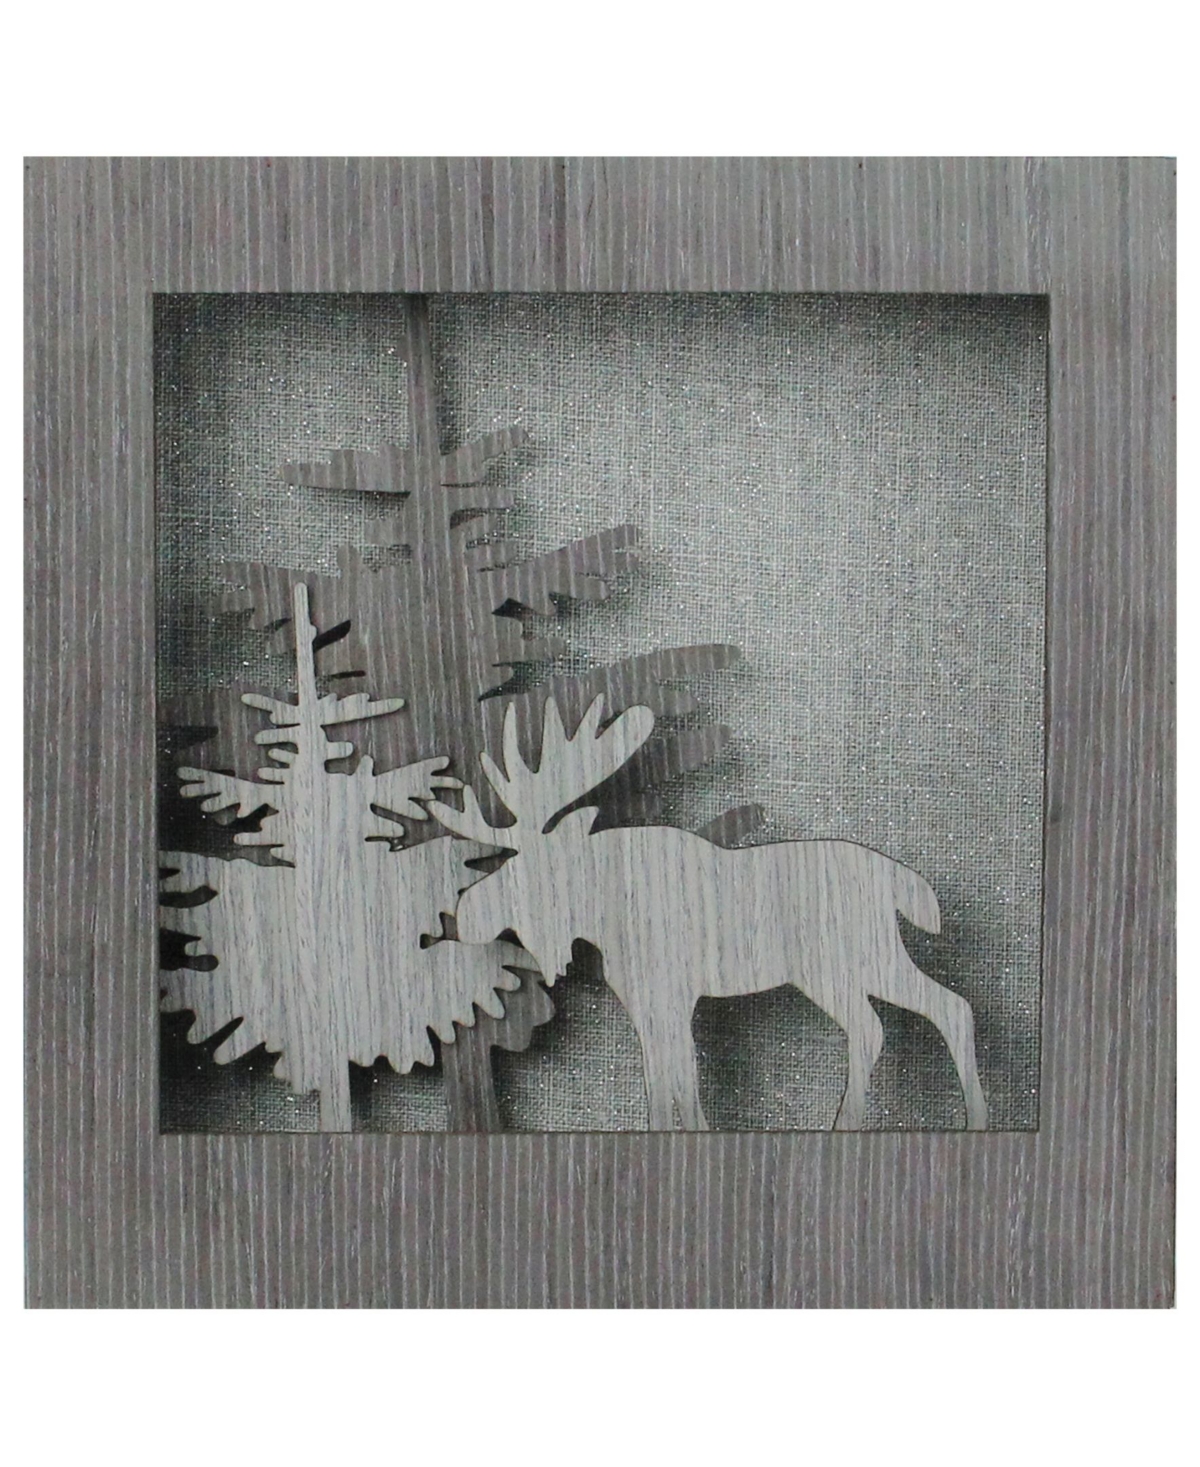 10" Glittered Moose Silhouette Box Framed Christmas Table Decoration - Gray